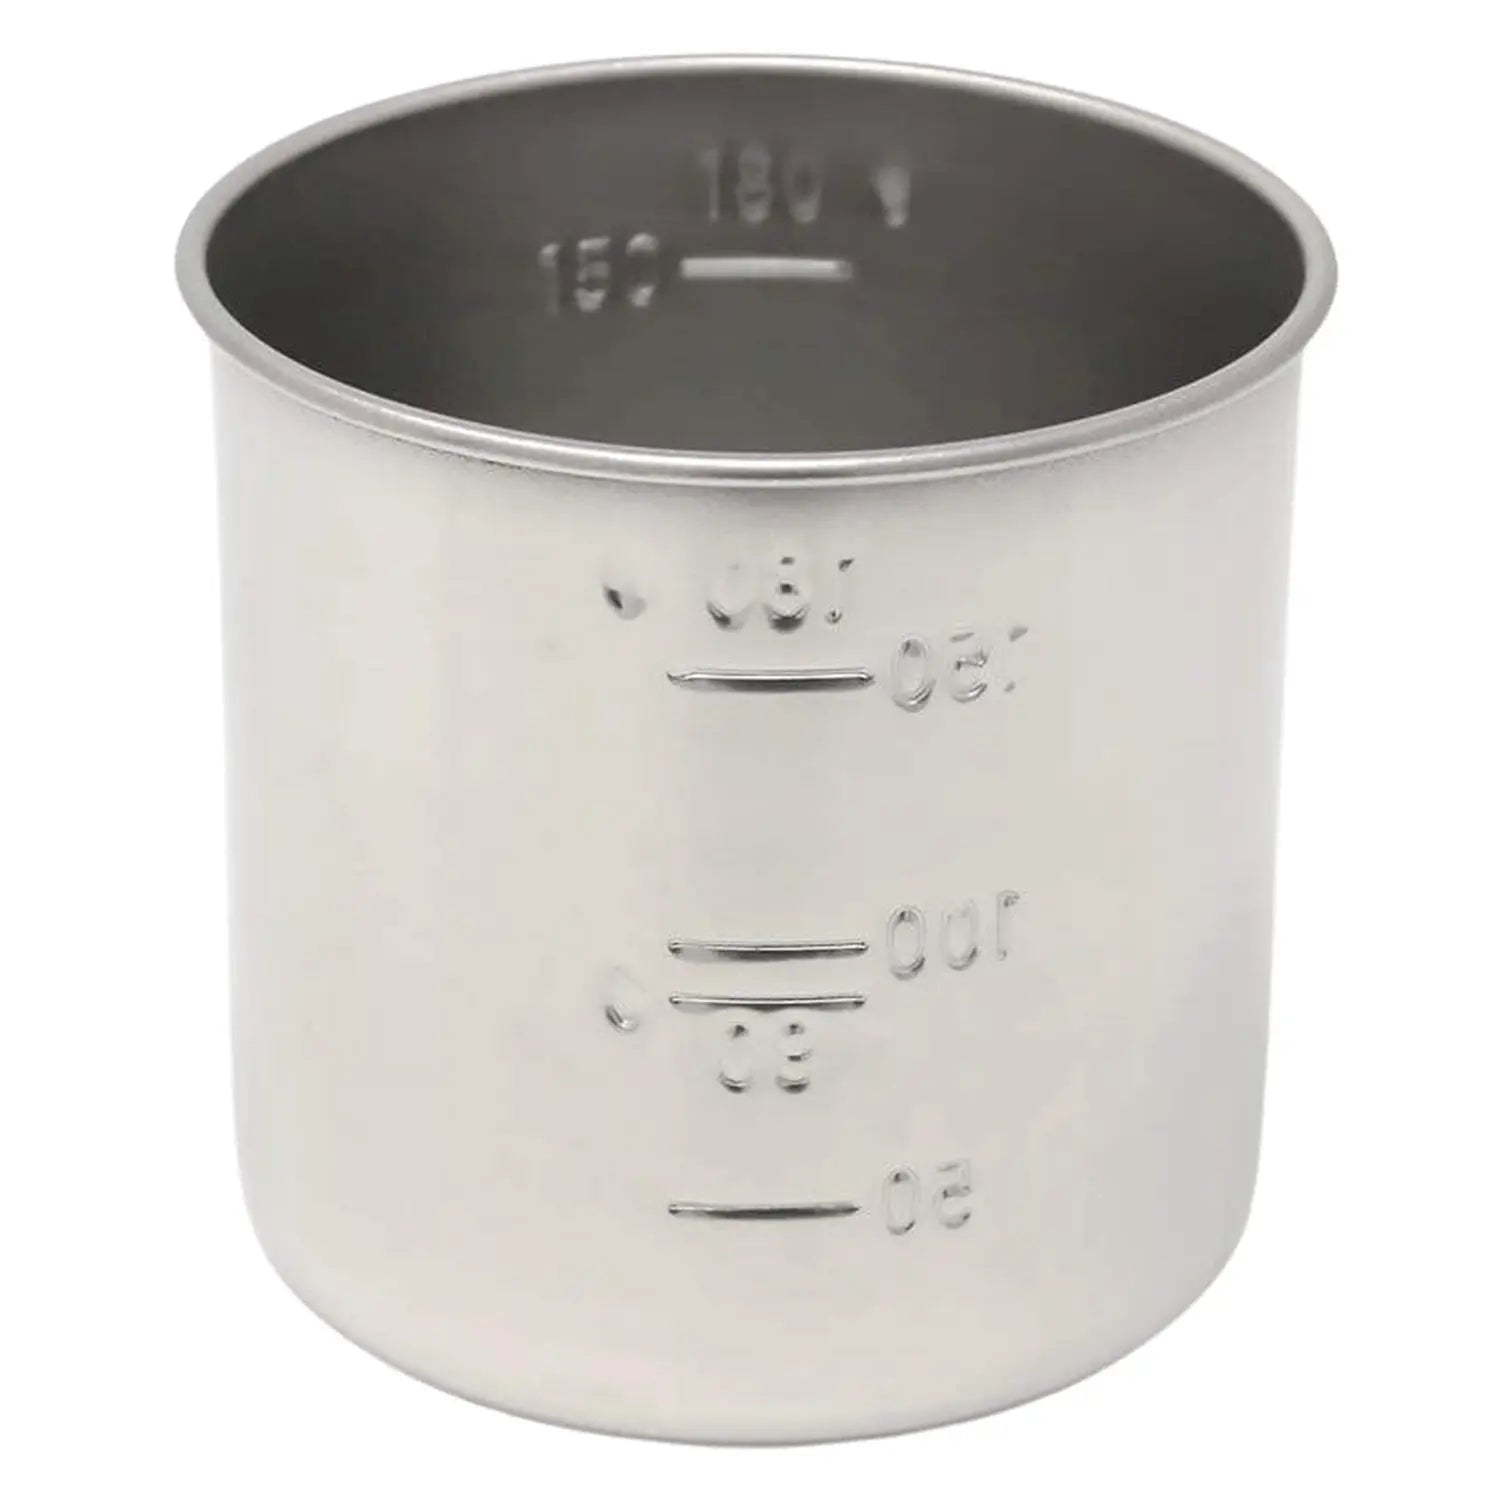 Winco 8 cup Measuring Cup - The Peppermill